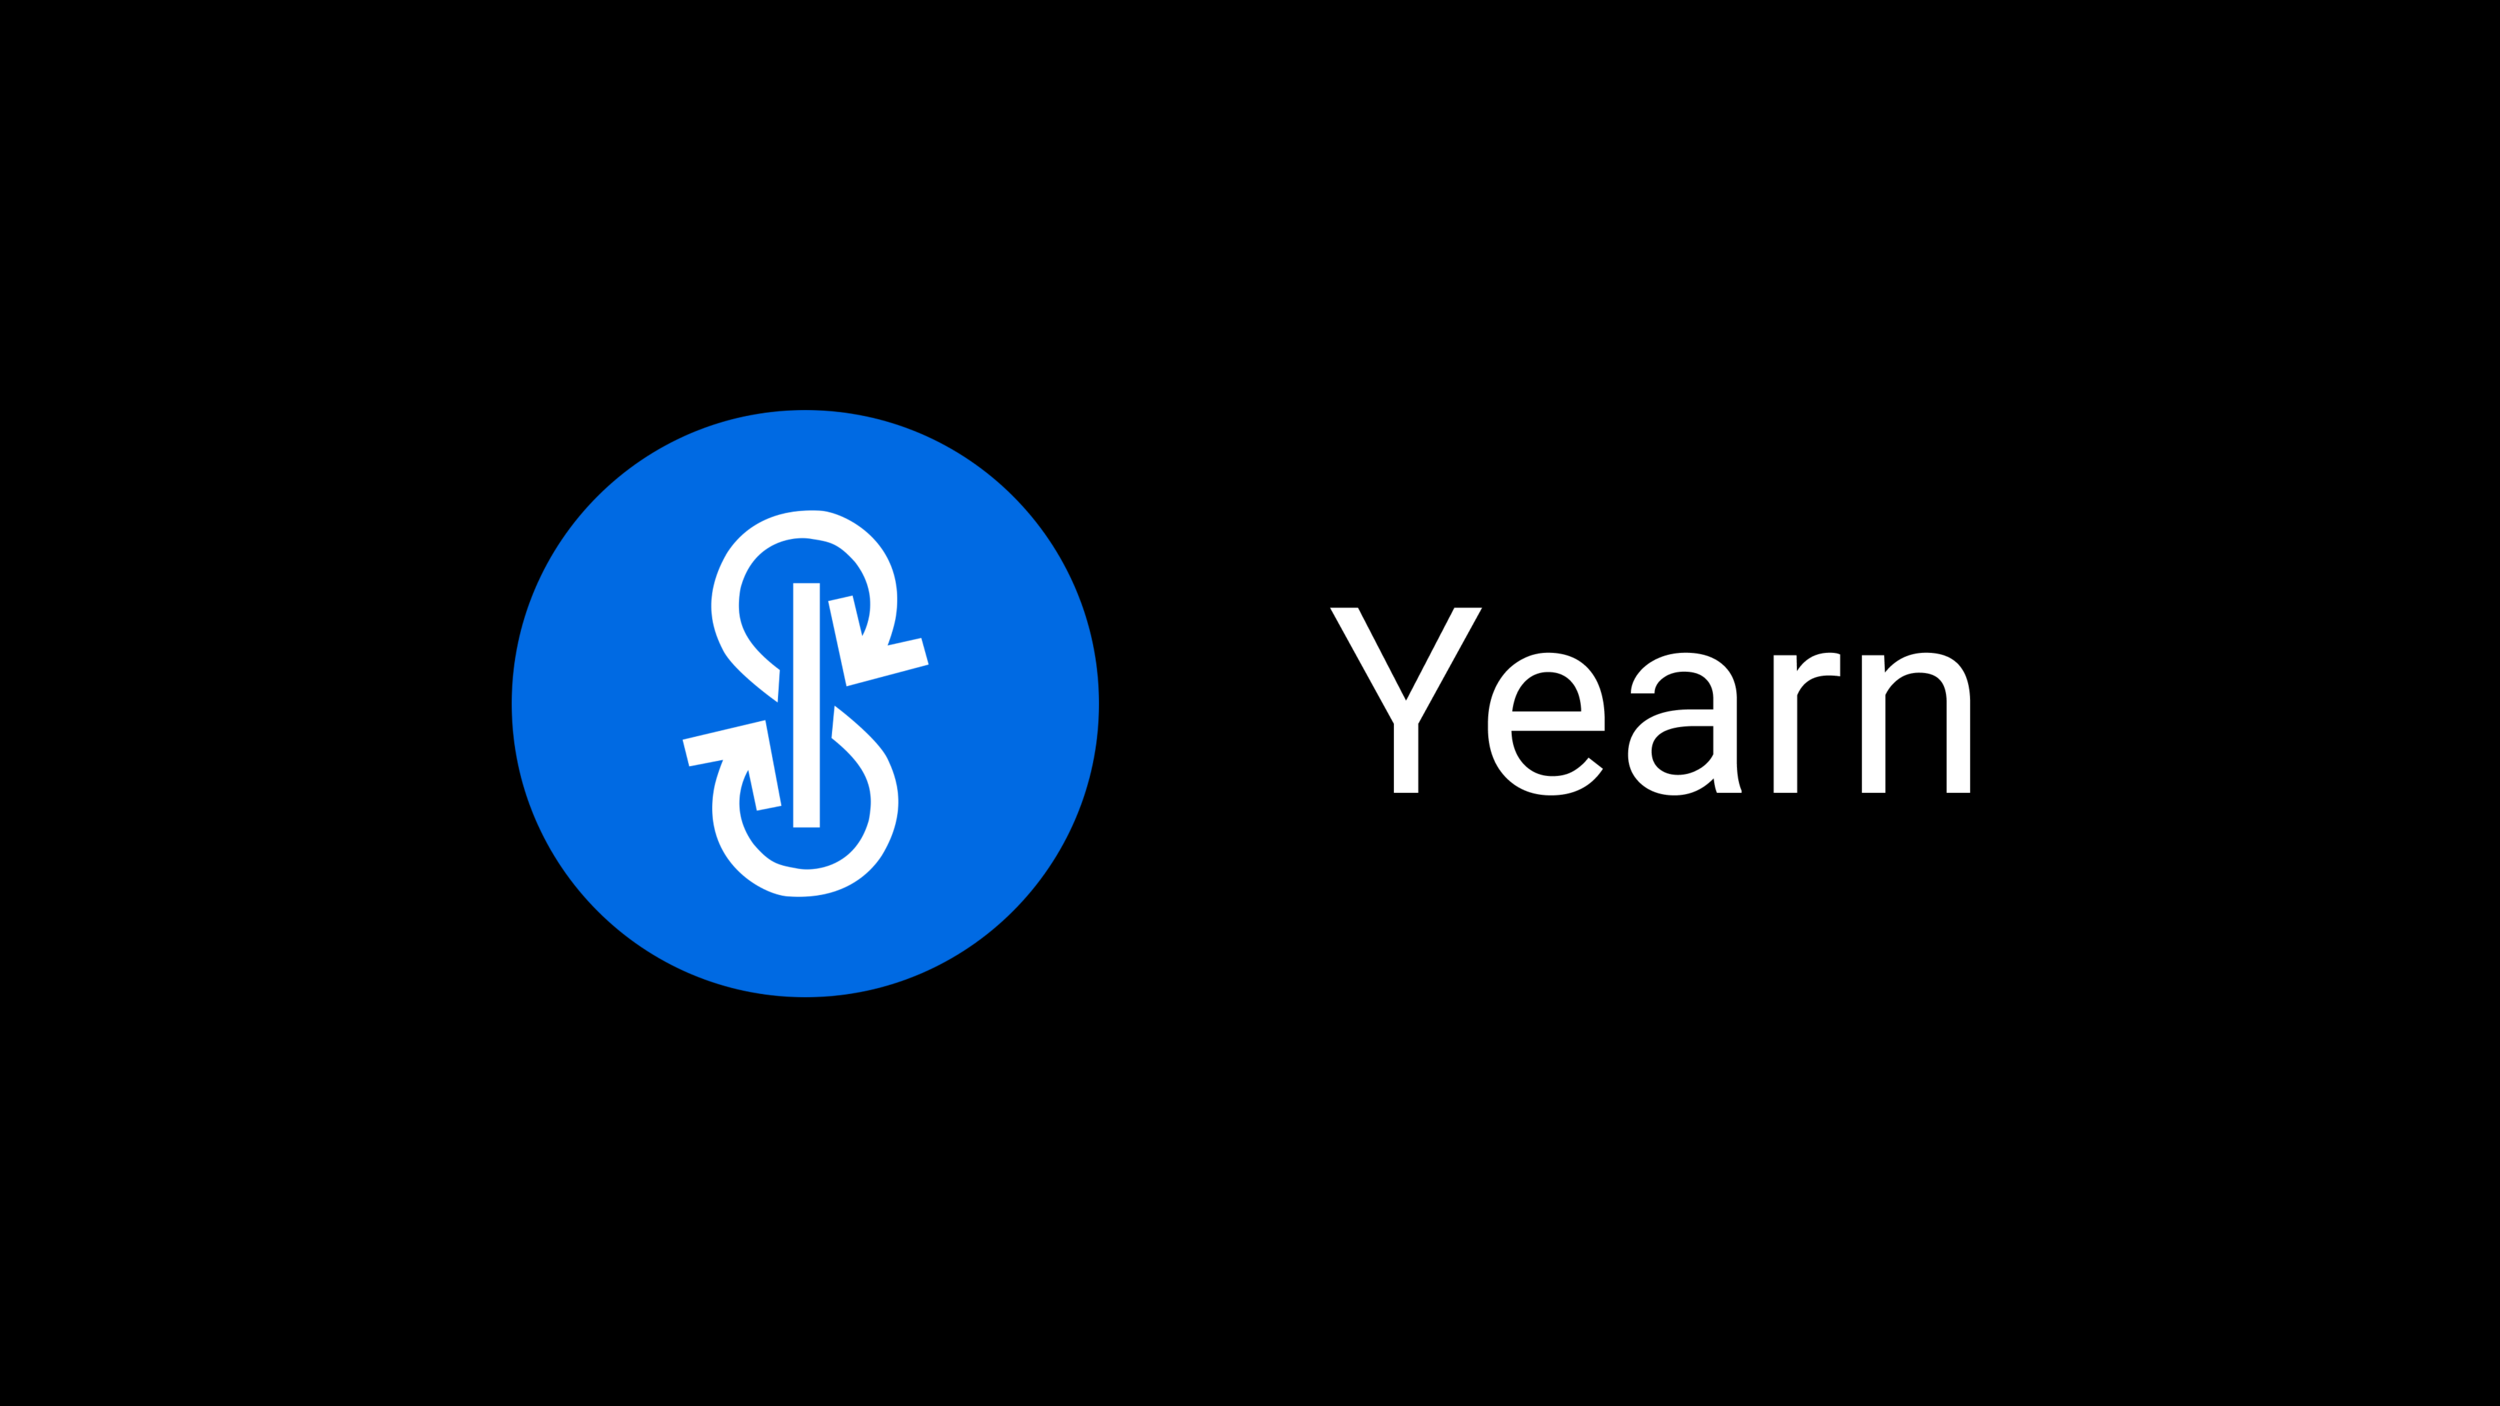 Introduction To Yearn Finance